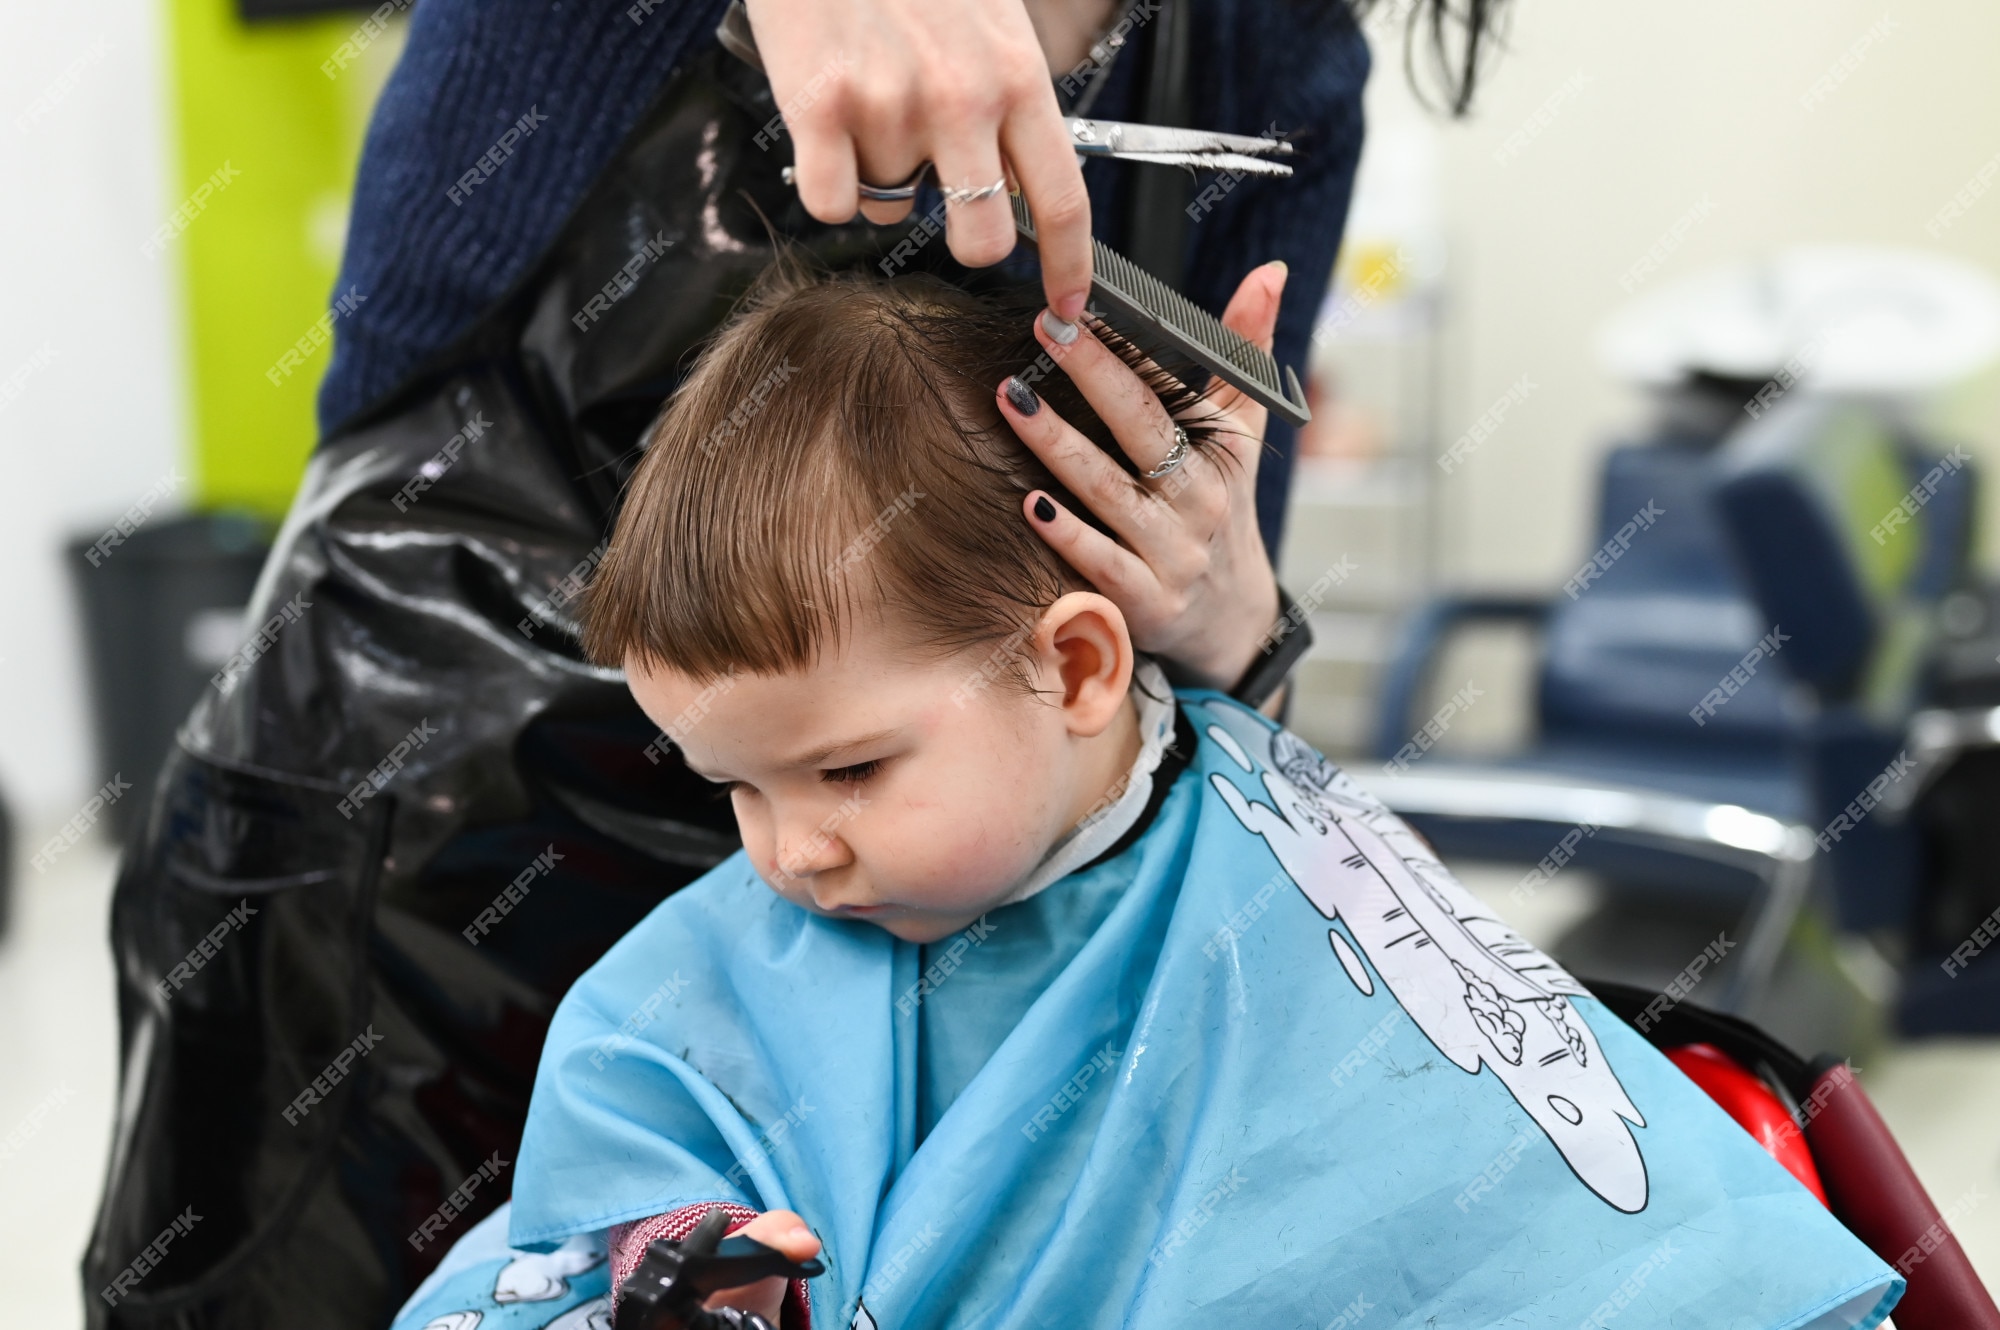 Premium Photo | Haircut boy 0-1 years. the first haircut of the child at  the hairdresser. baby haircut toddler.